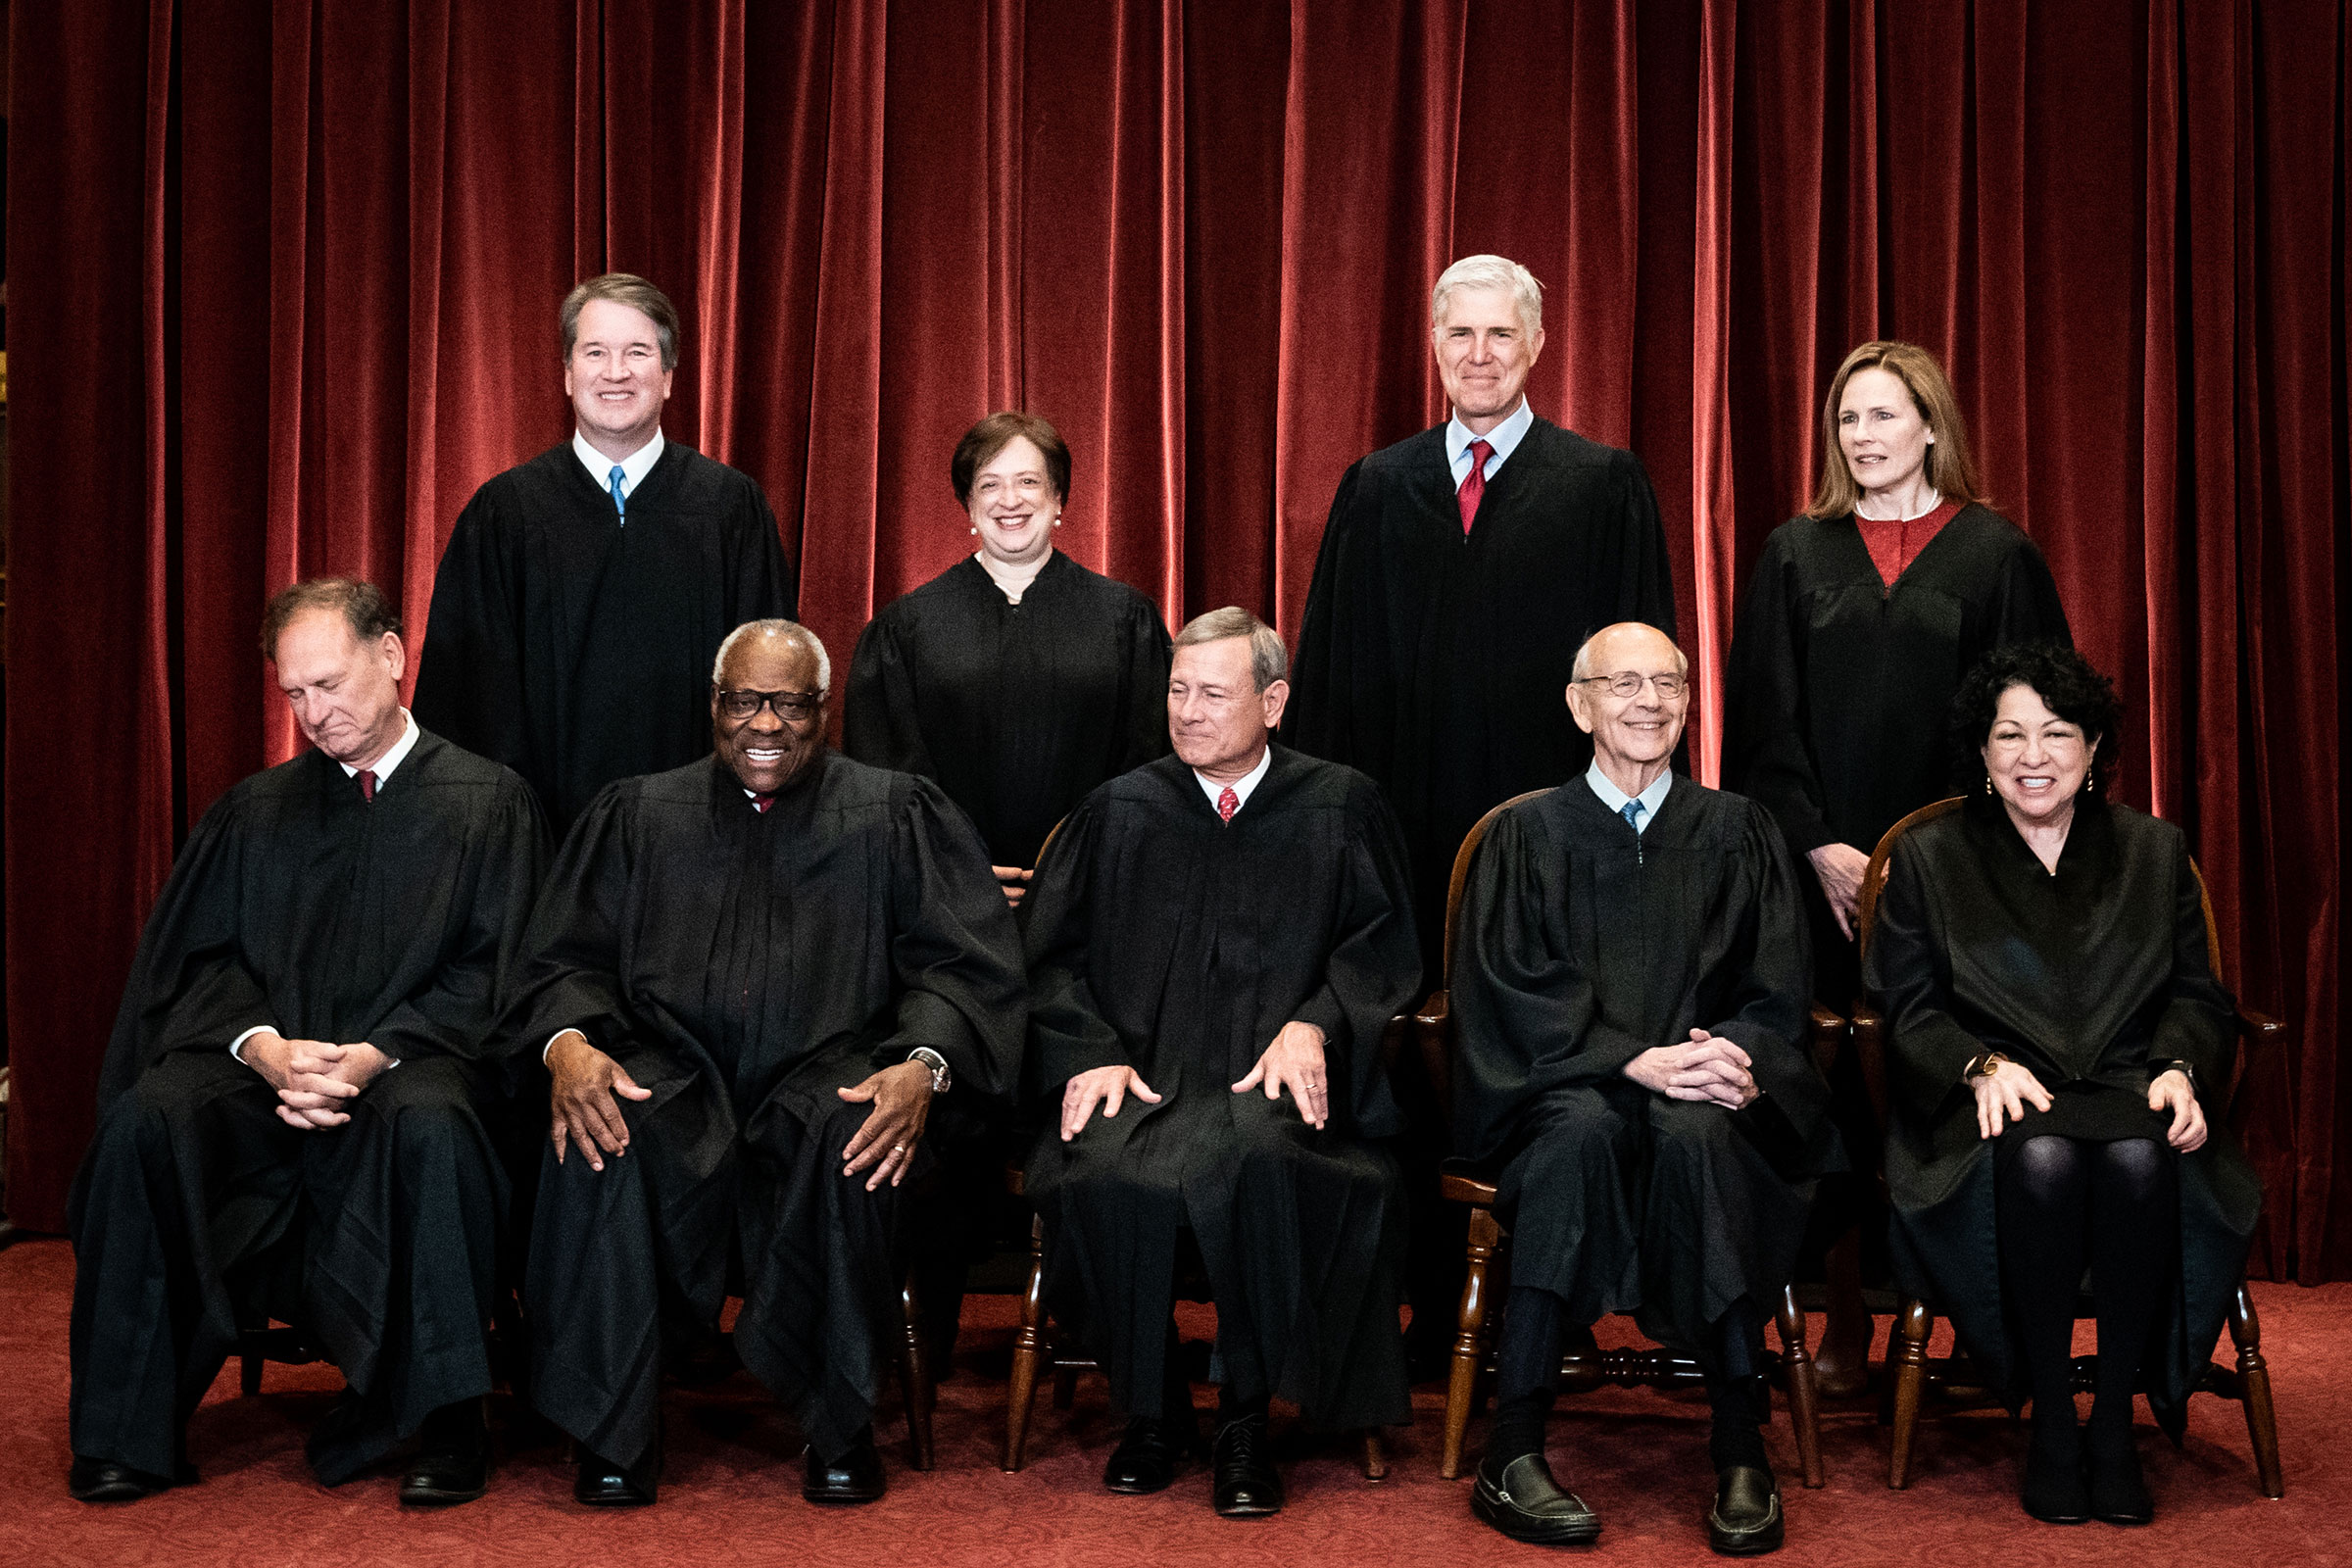 Justices of the U.S. Supreme Court during a formal group photograph at the Supreme Court in Washington, D.C., U.S., on Friday, April 23, 2021. (Erin Schaff—The New York Times/Bloomberg/Getty Images)